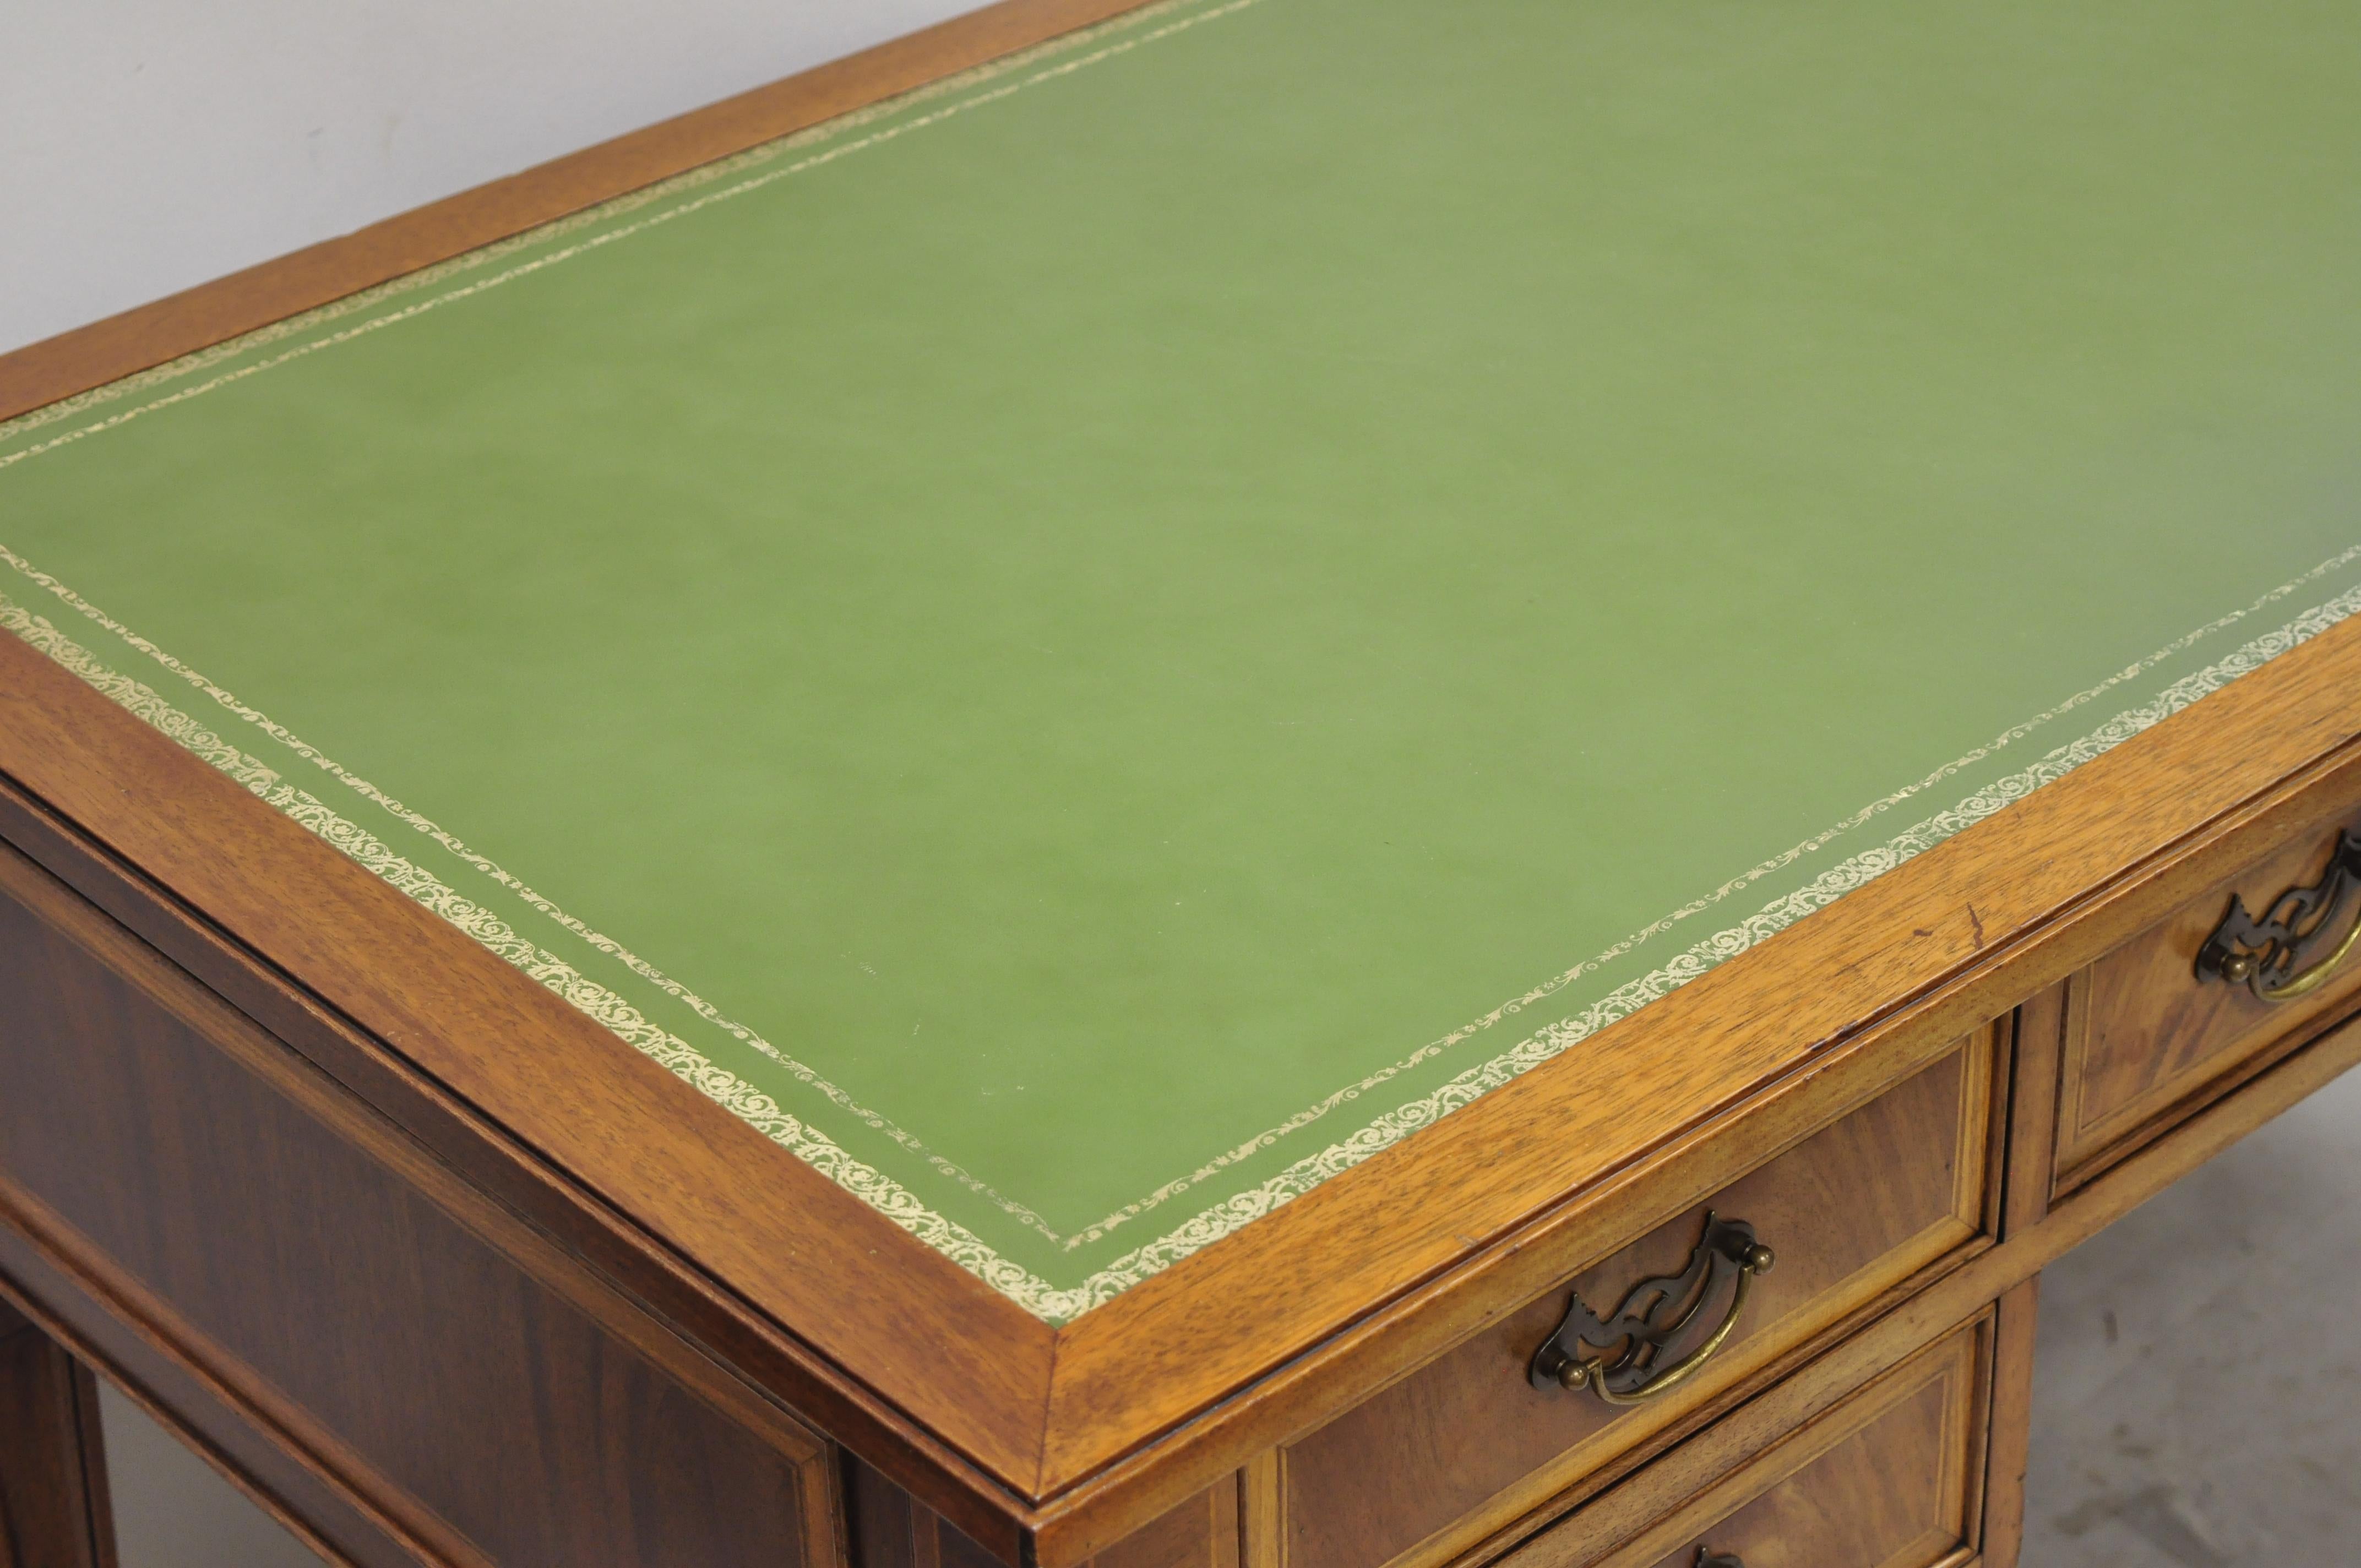 Vintage English Chippendale style green leather top crotch mahogany executive office desk. Item features green tooled leather top, solid wood construction, beautiful wood grain, finished back, 5 dovetailed drawers, tapered legs, very nice antique